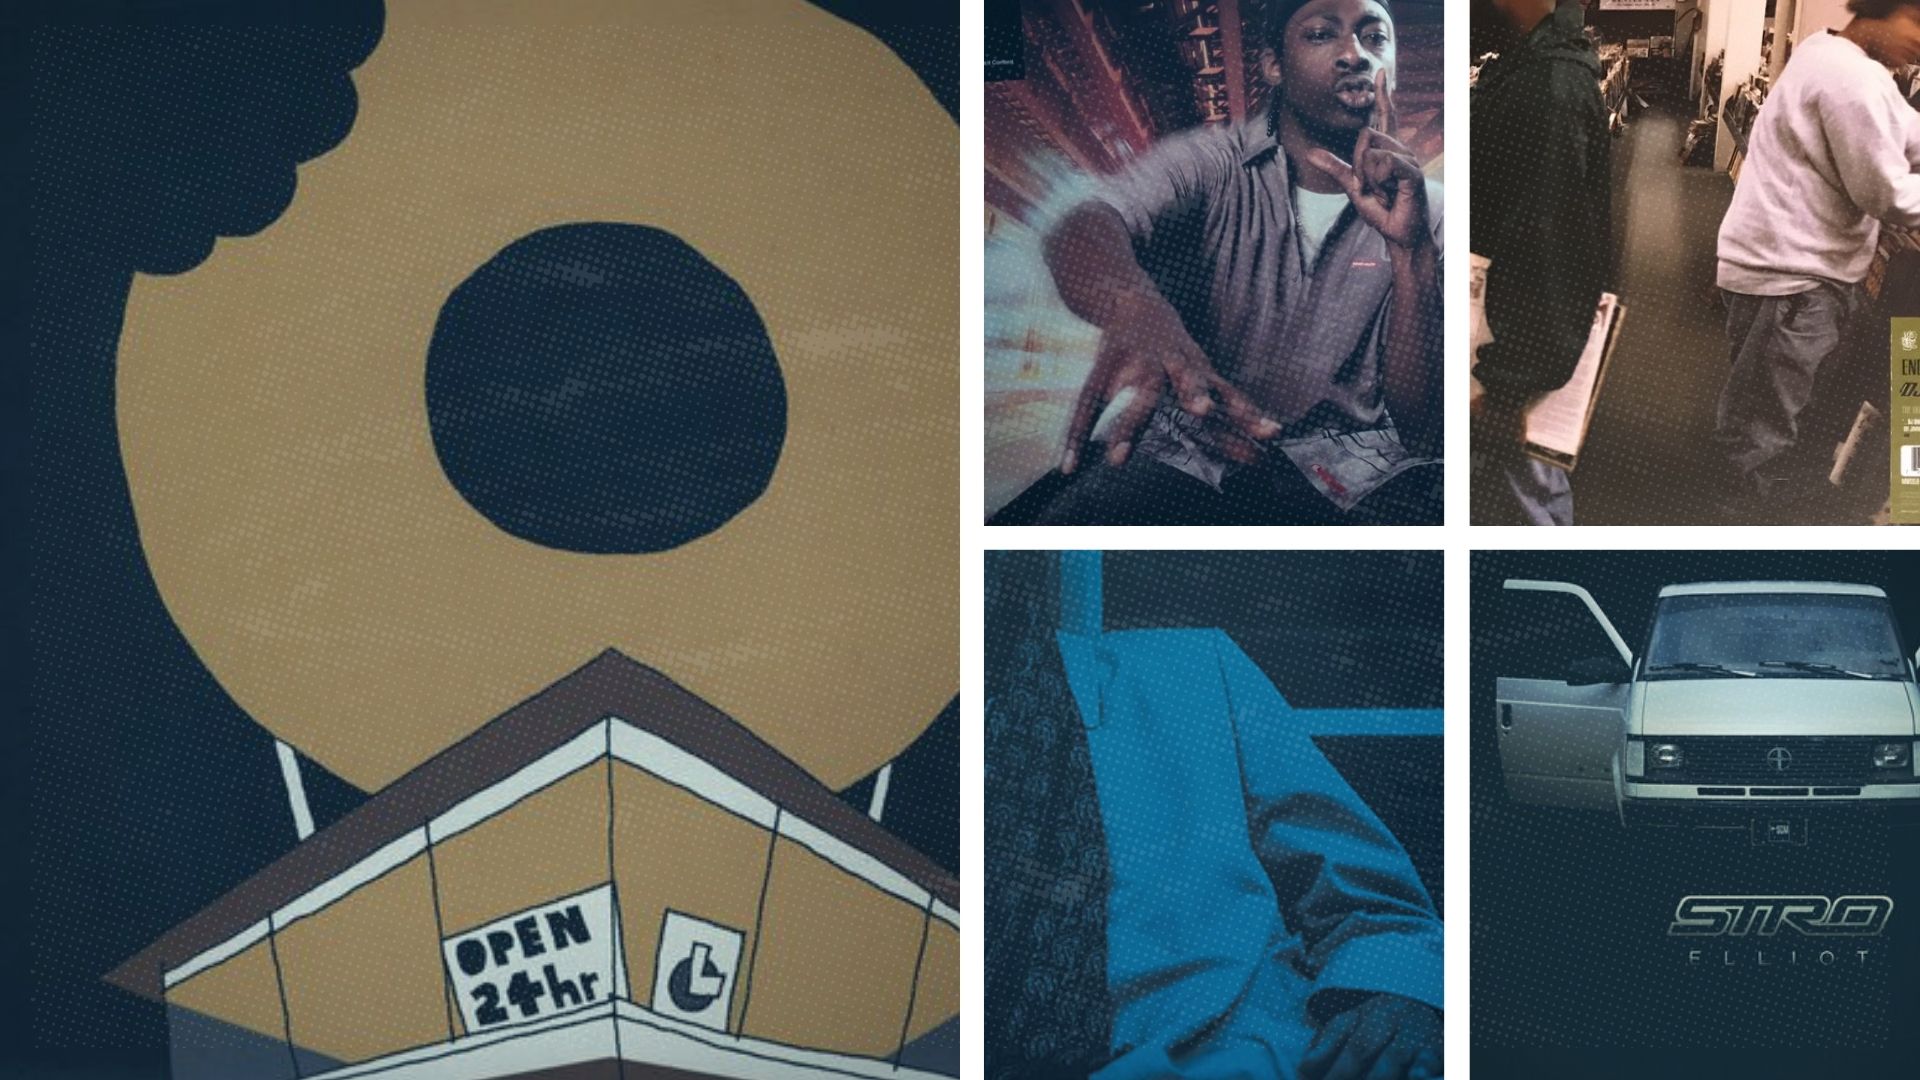 If You Like Donuts by J Dilla, Listen to These 4 Albums